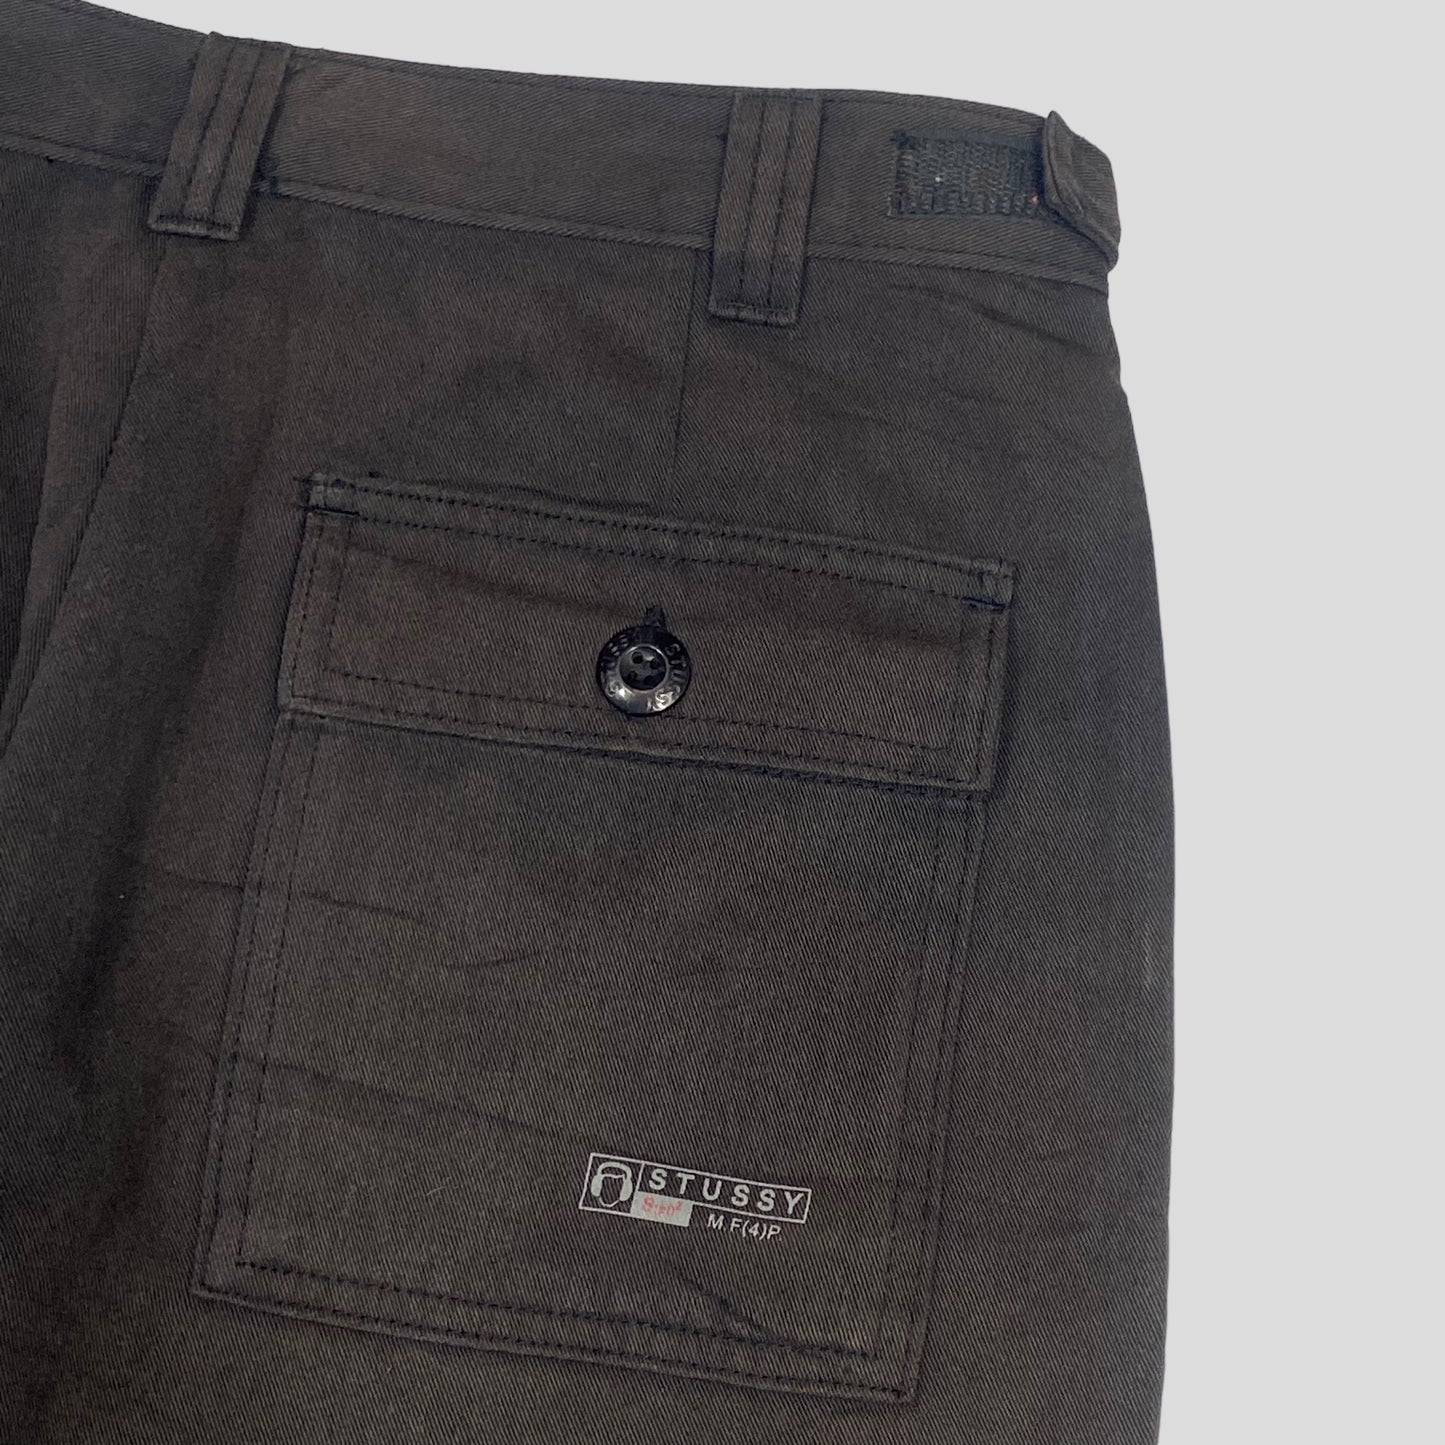 Stussy 90’s M.F.P Baggy Work Trousers - 32